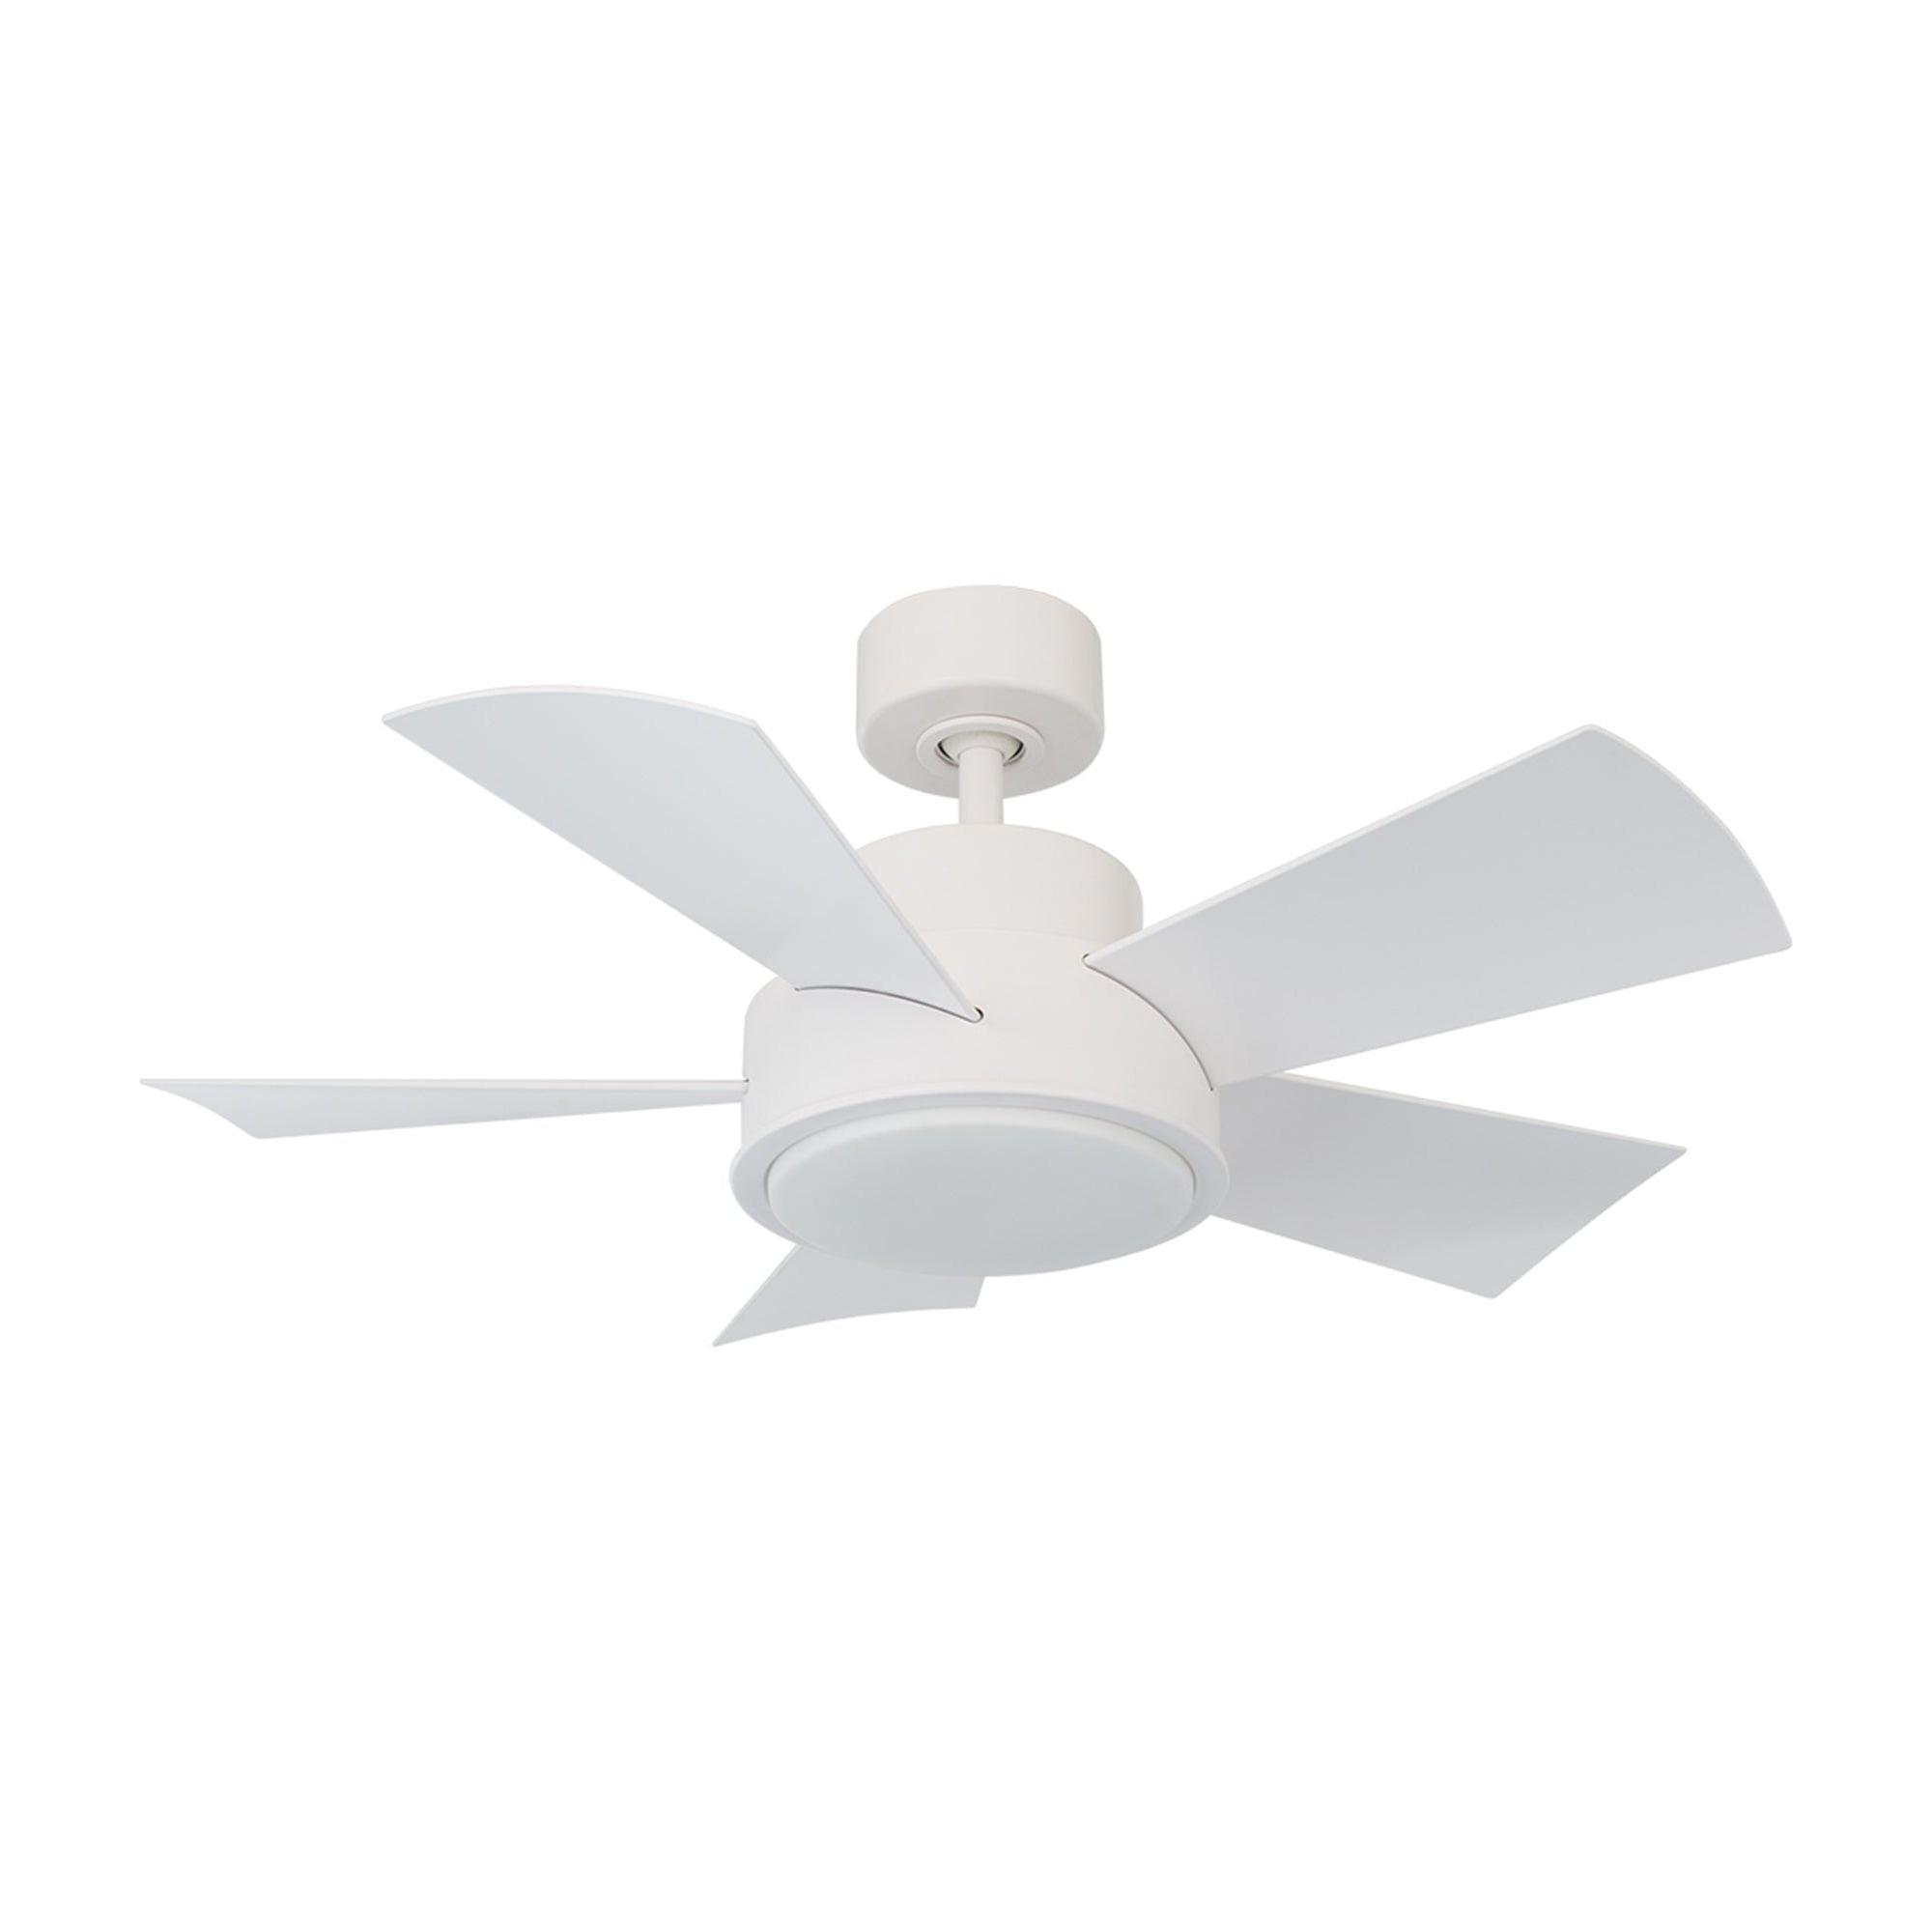 Vox Indoor/Outdoor 5-Blade 38" Smart Ceiling Fan with LED Light Kit and Remote Control